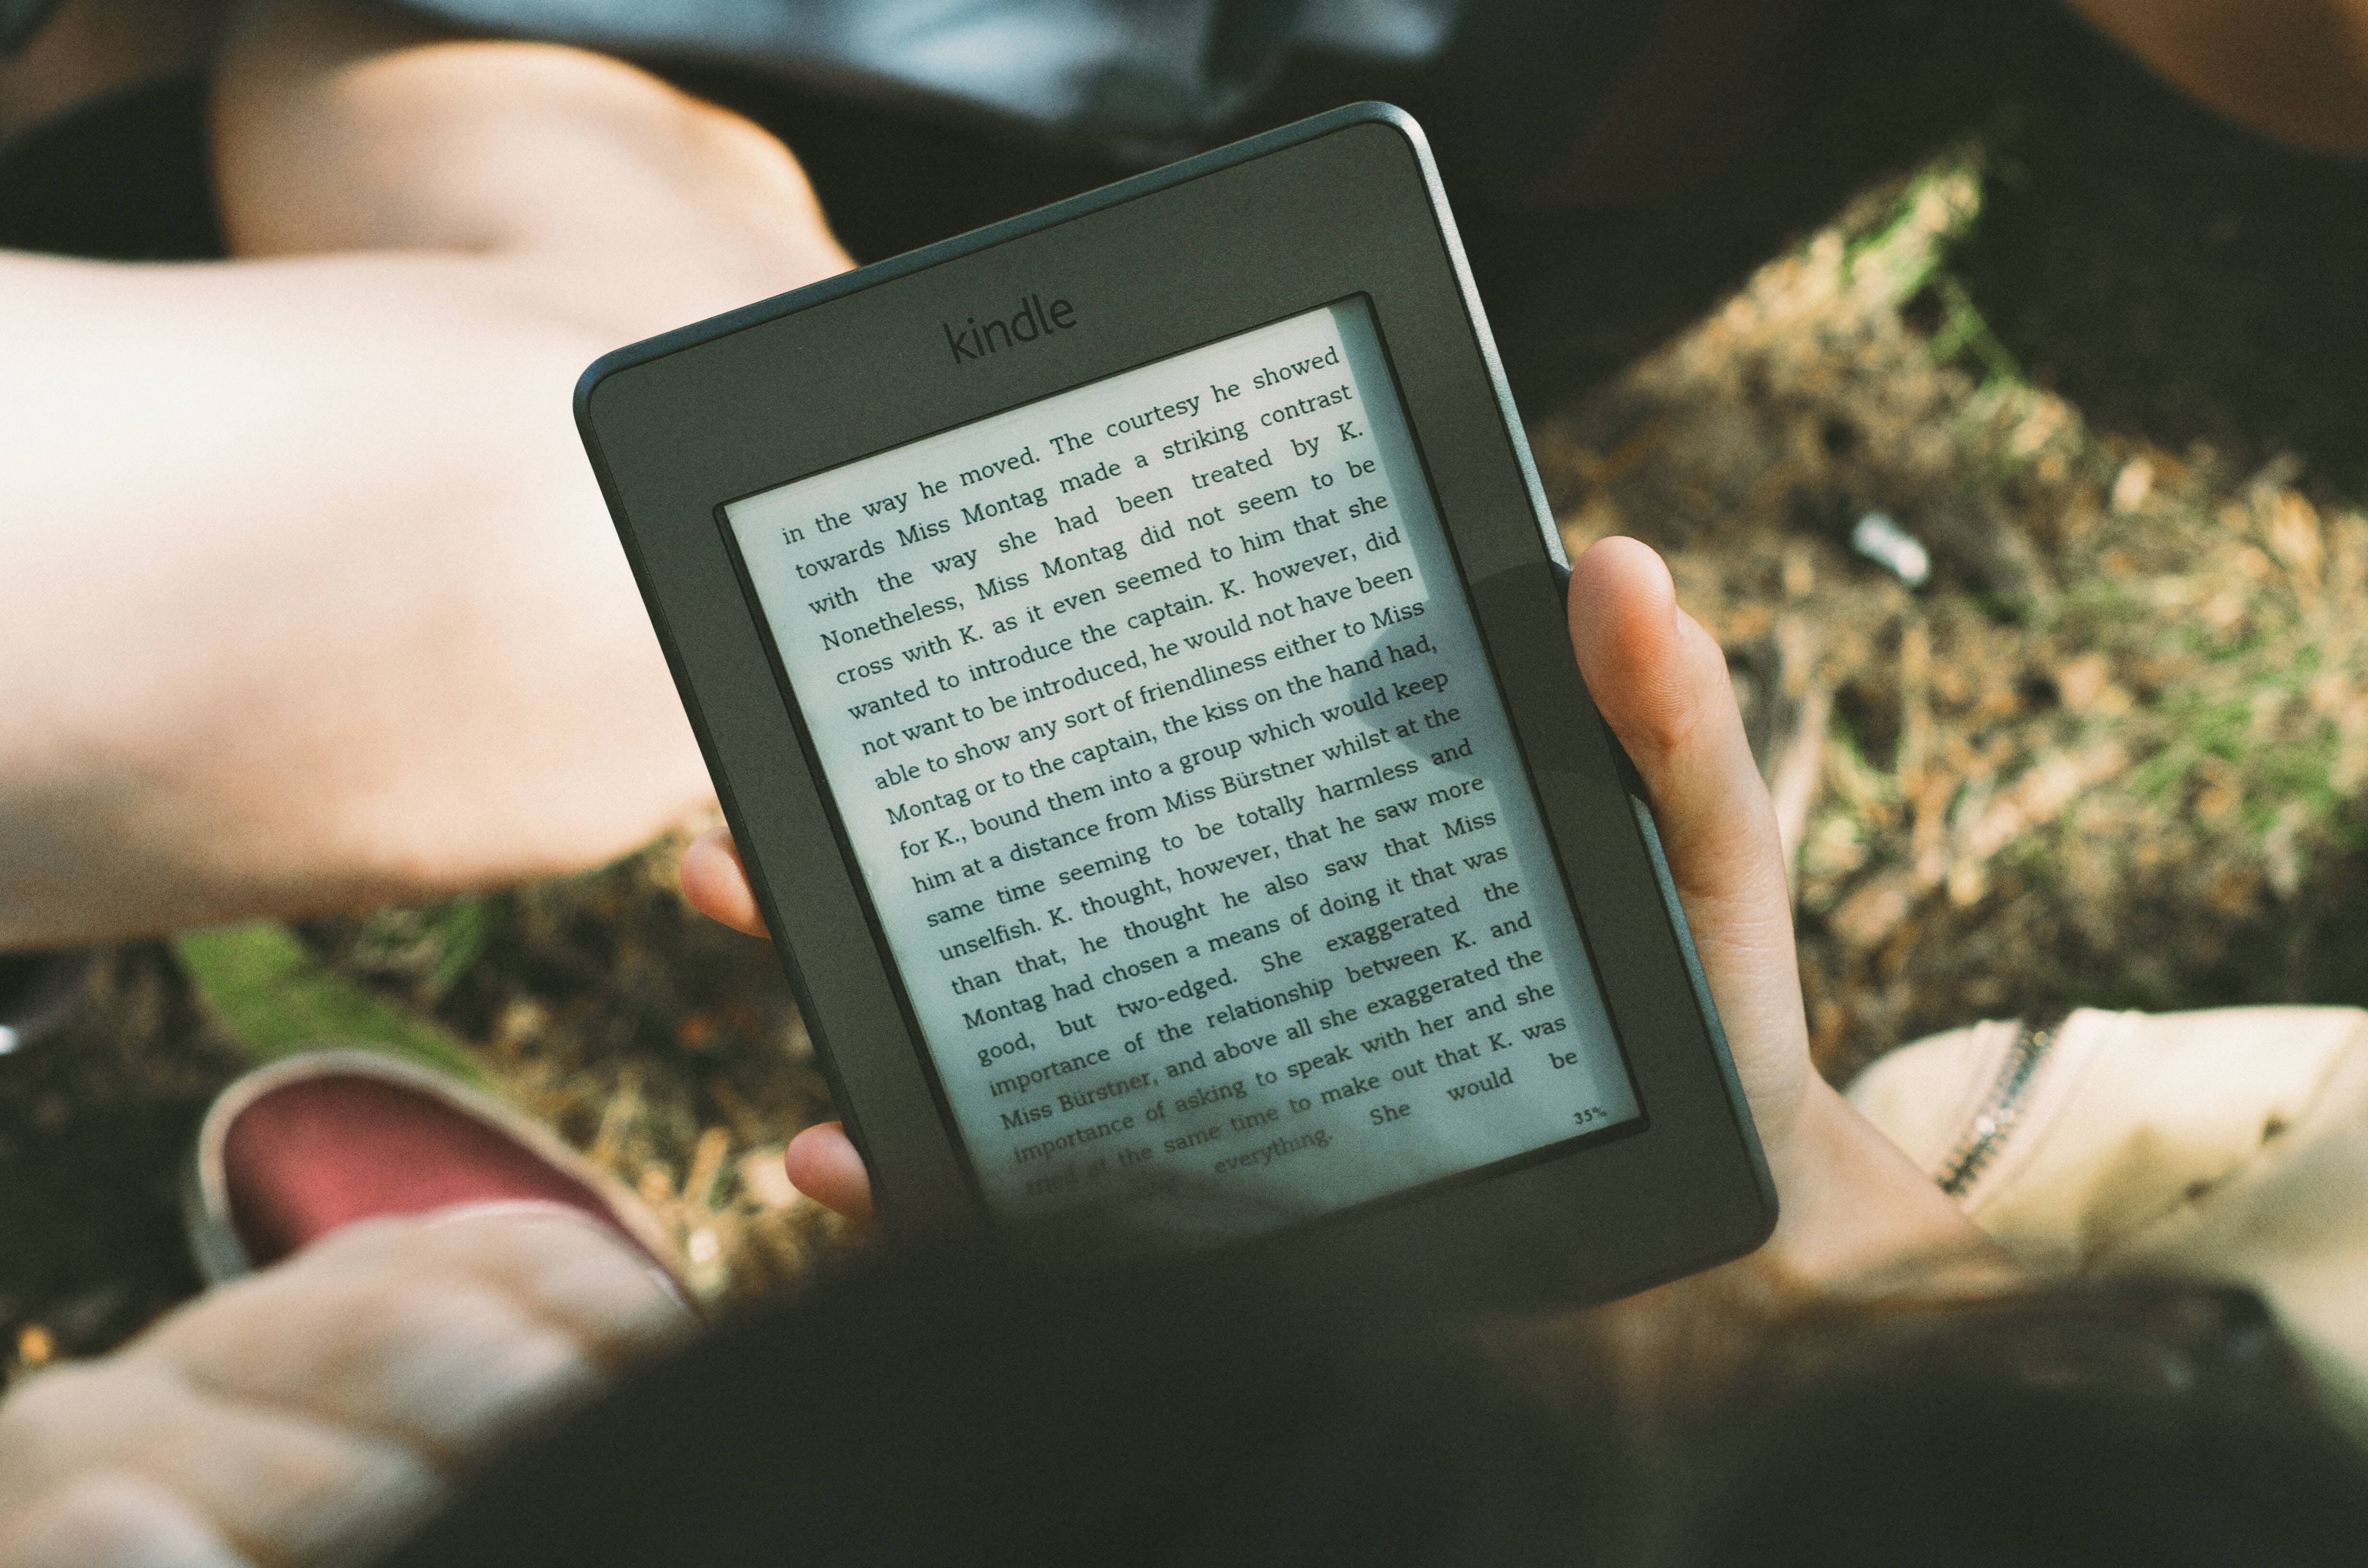 Hand holding a black Kindle, grass in the background